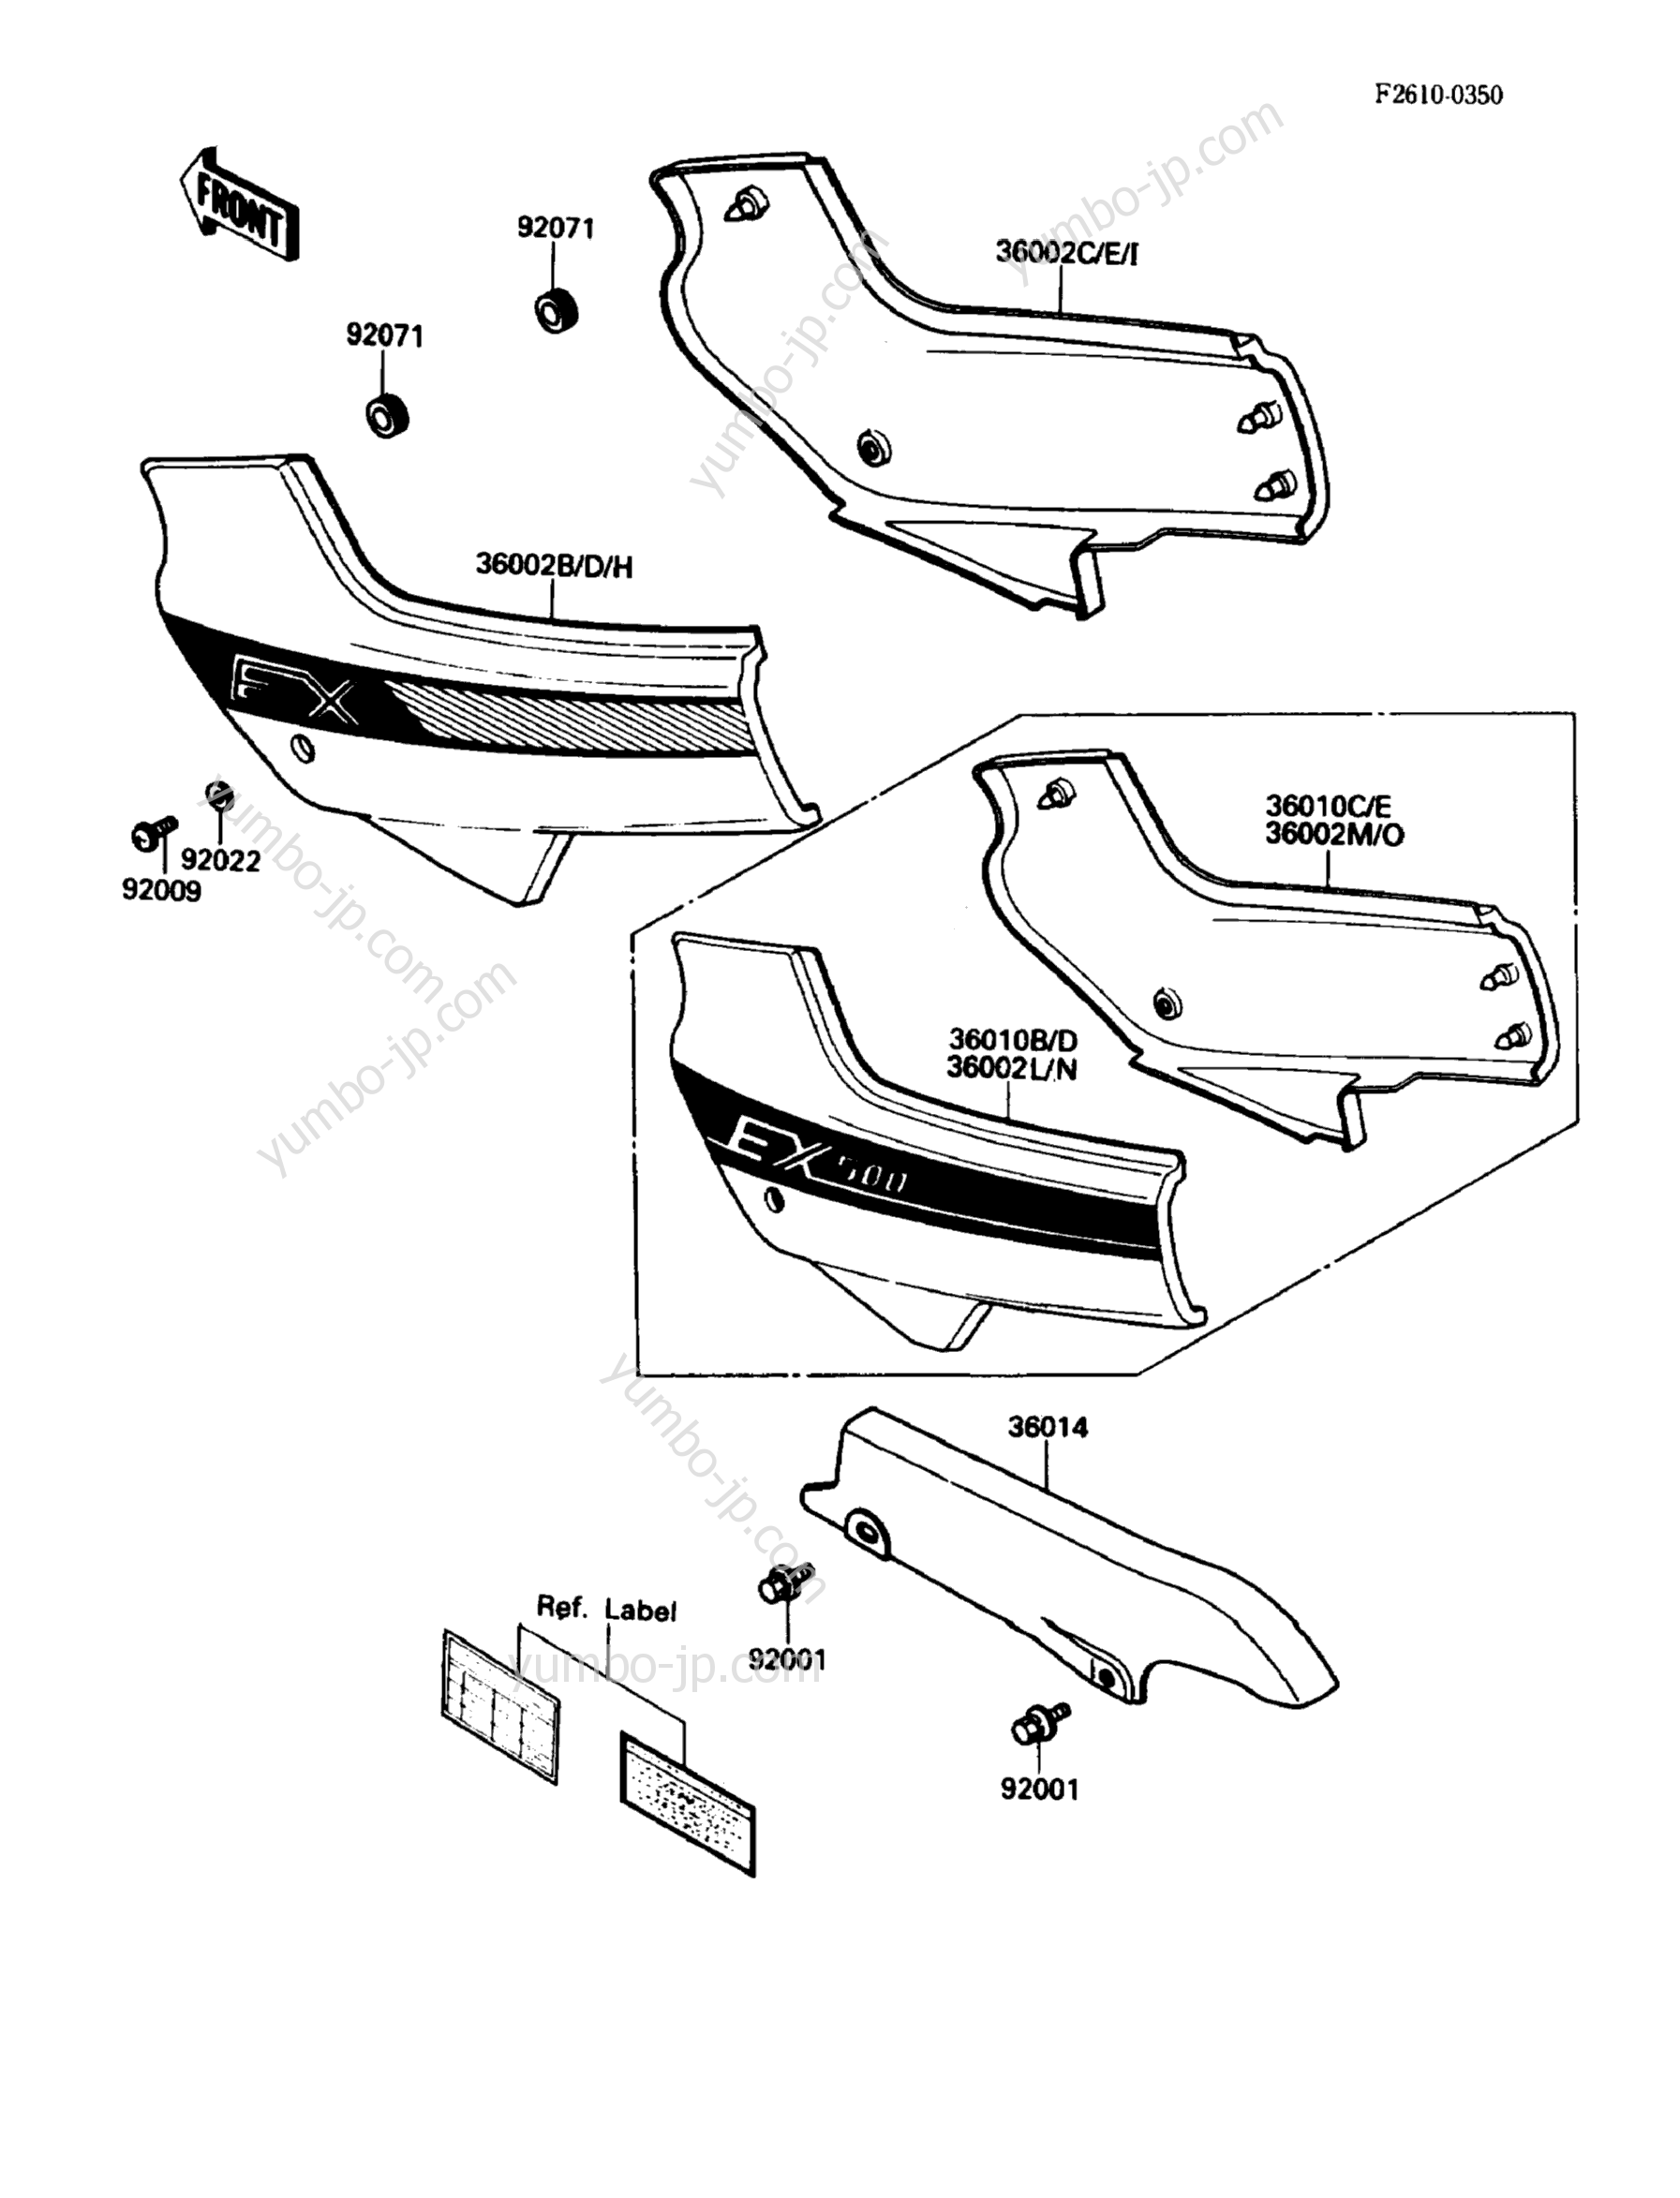 Side Covers/Chain Cover for motorcycles KAWASAKI EX500 (EX500-A2) 1988 year